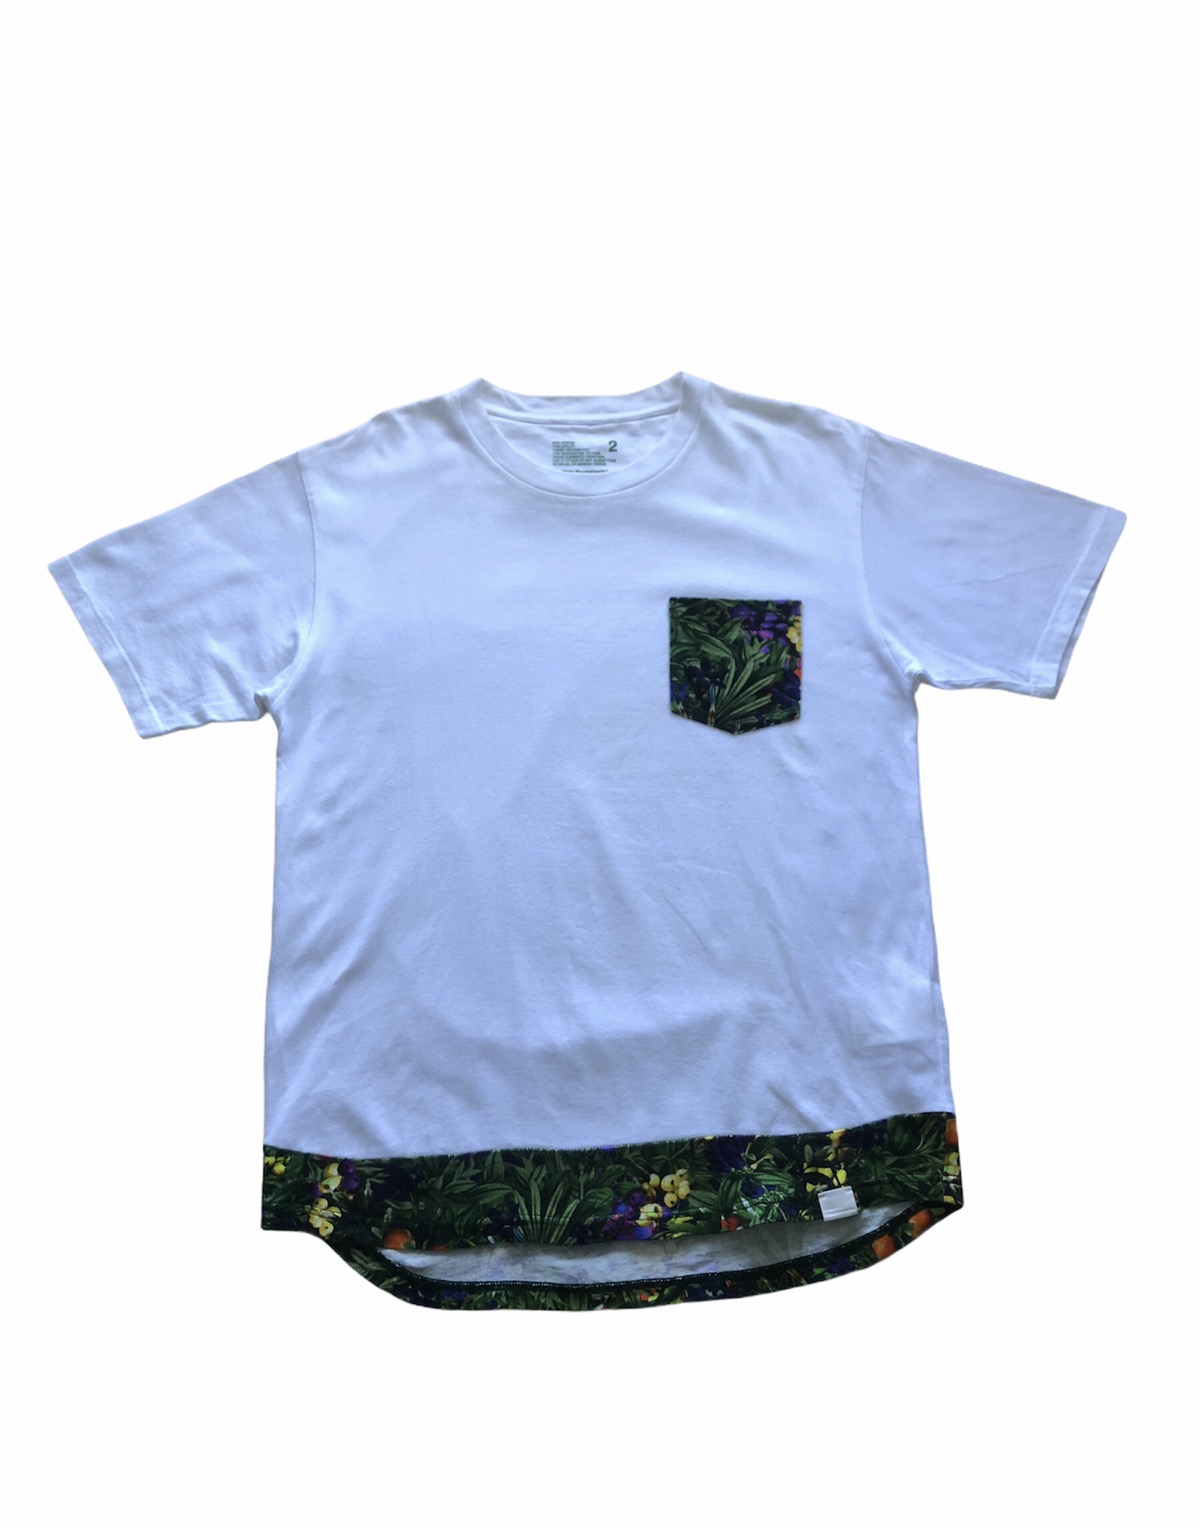 Attached Fabric Floral motif Pocket t shirt - 1